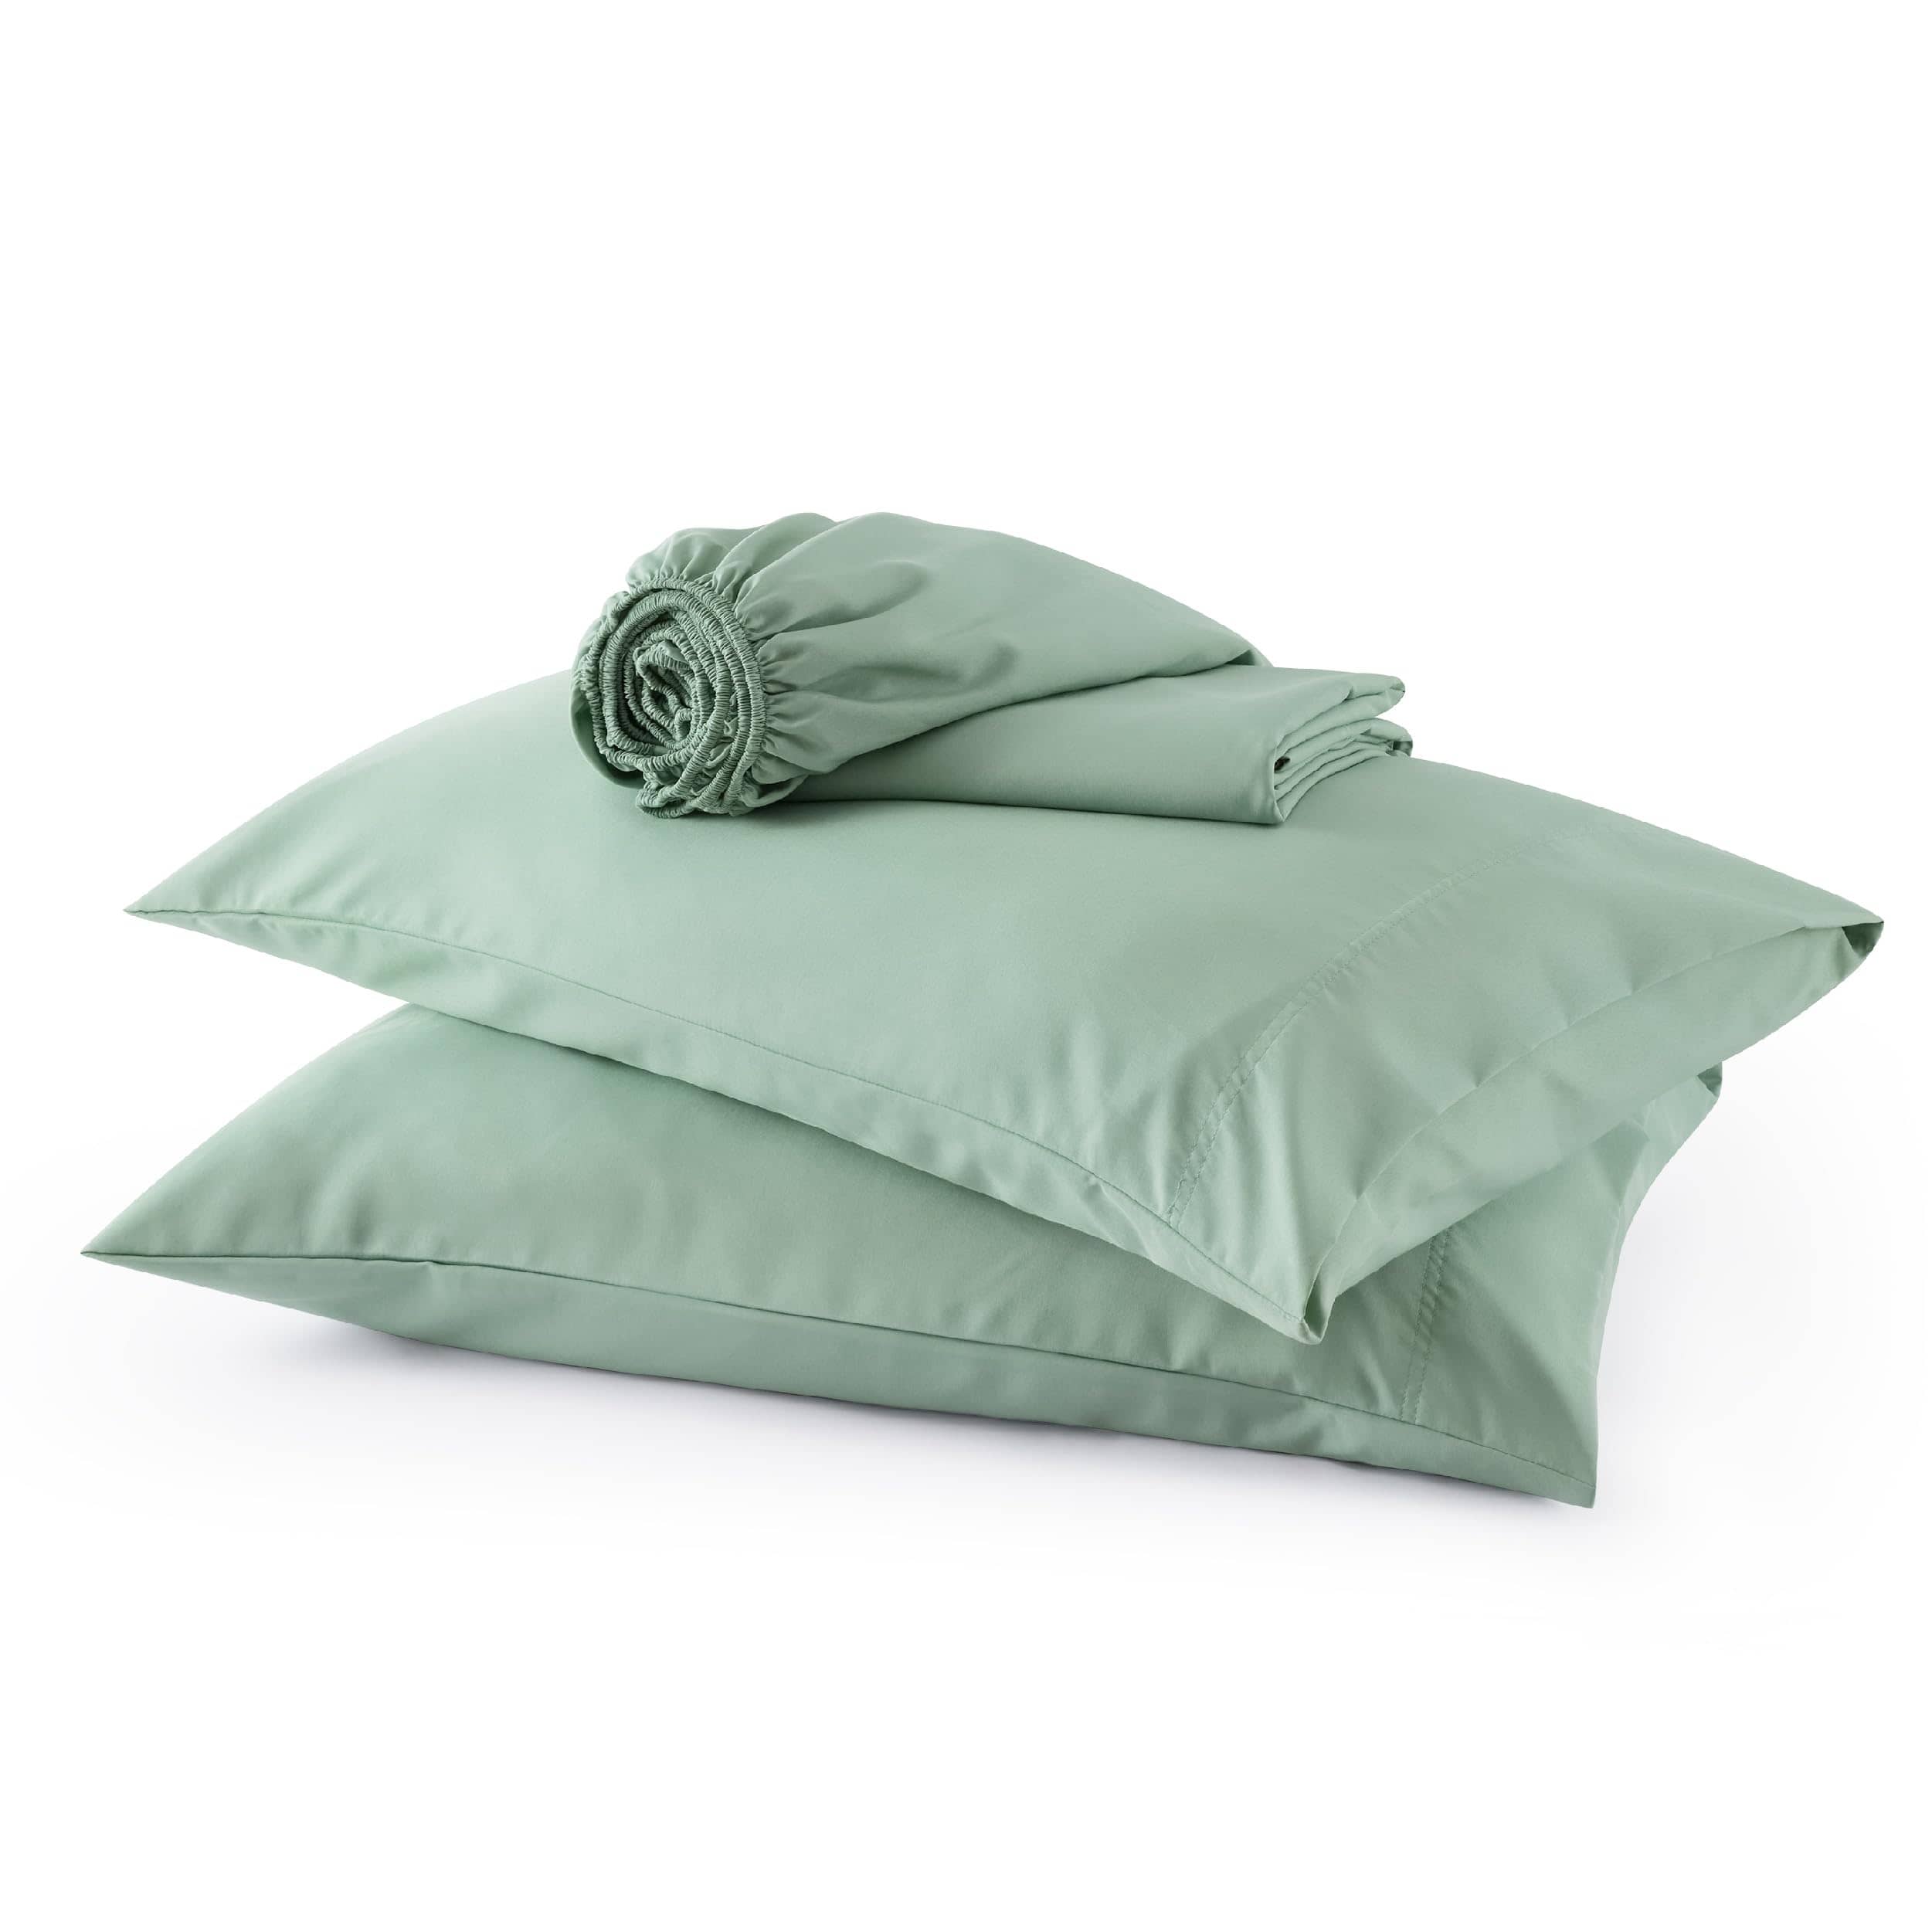 Sheet Set Polyester and Rayon Derived From Bamboo Blend